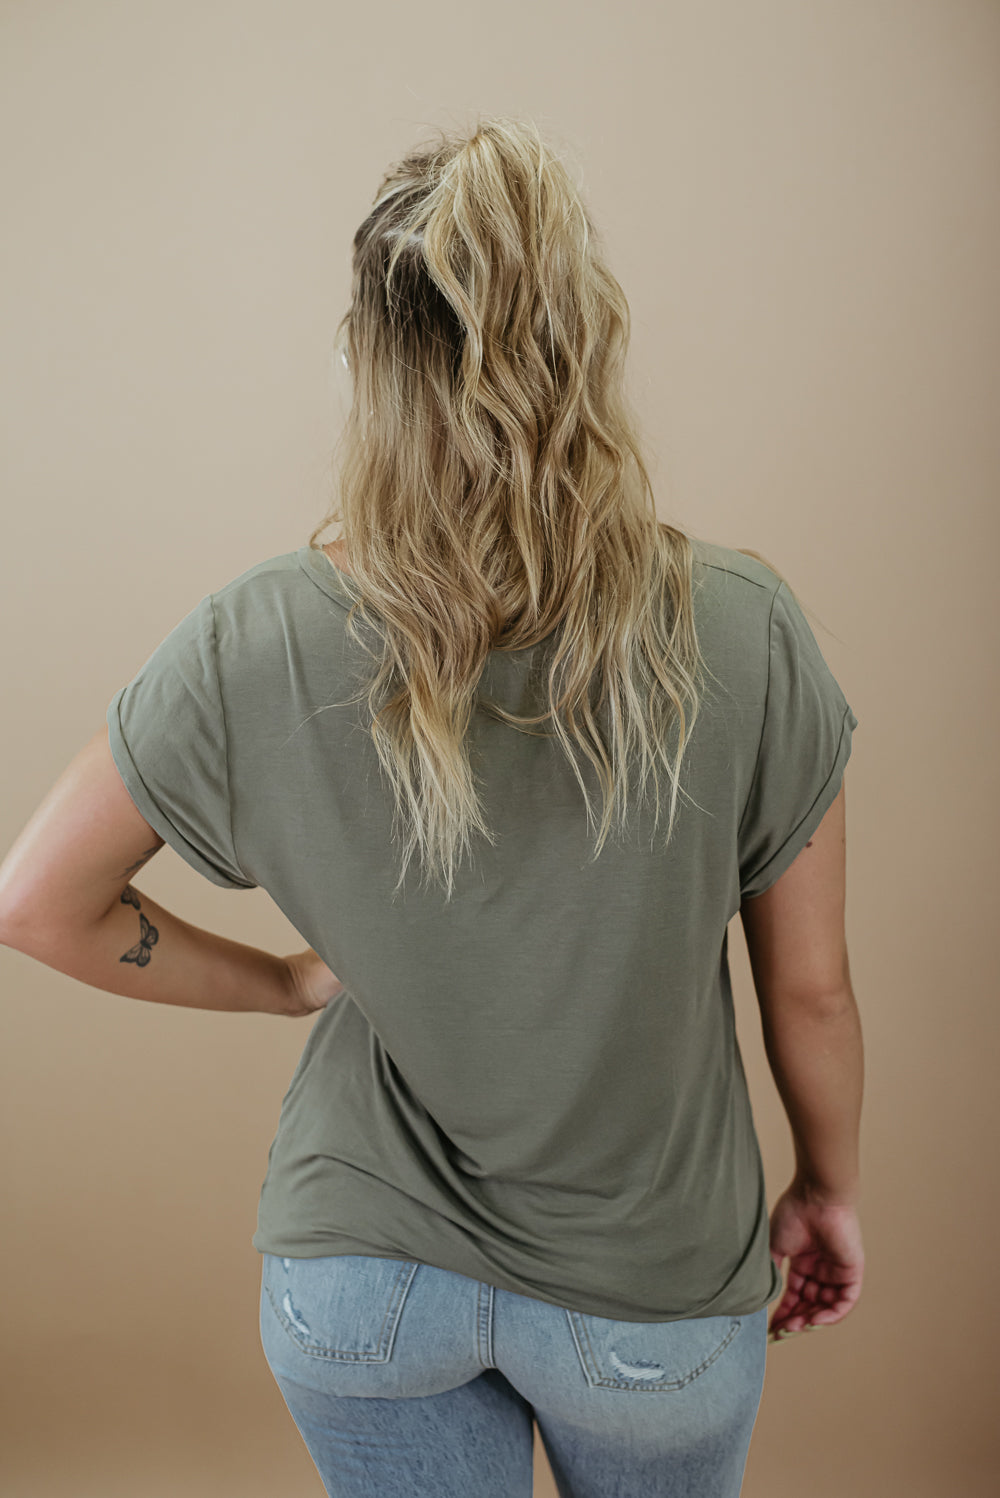 Your Favorite Basic Tee, Olive